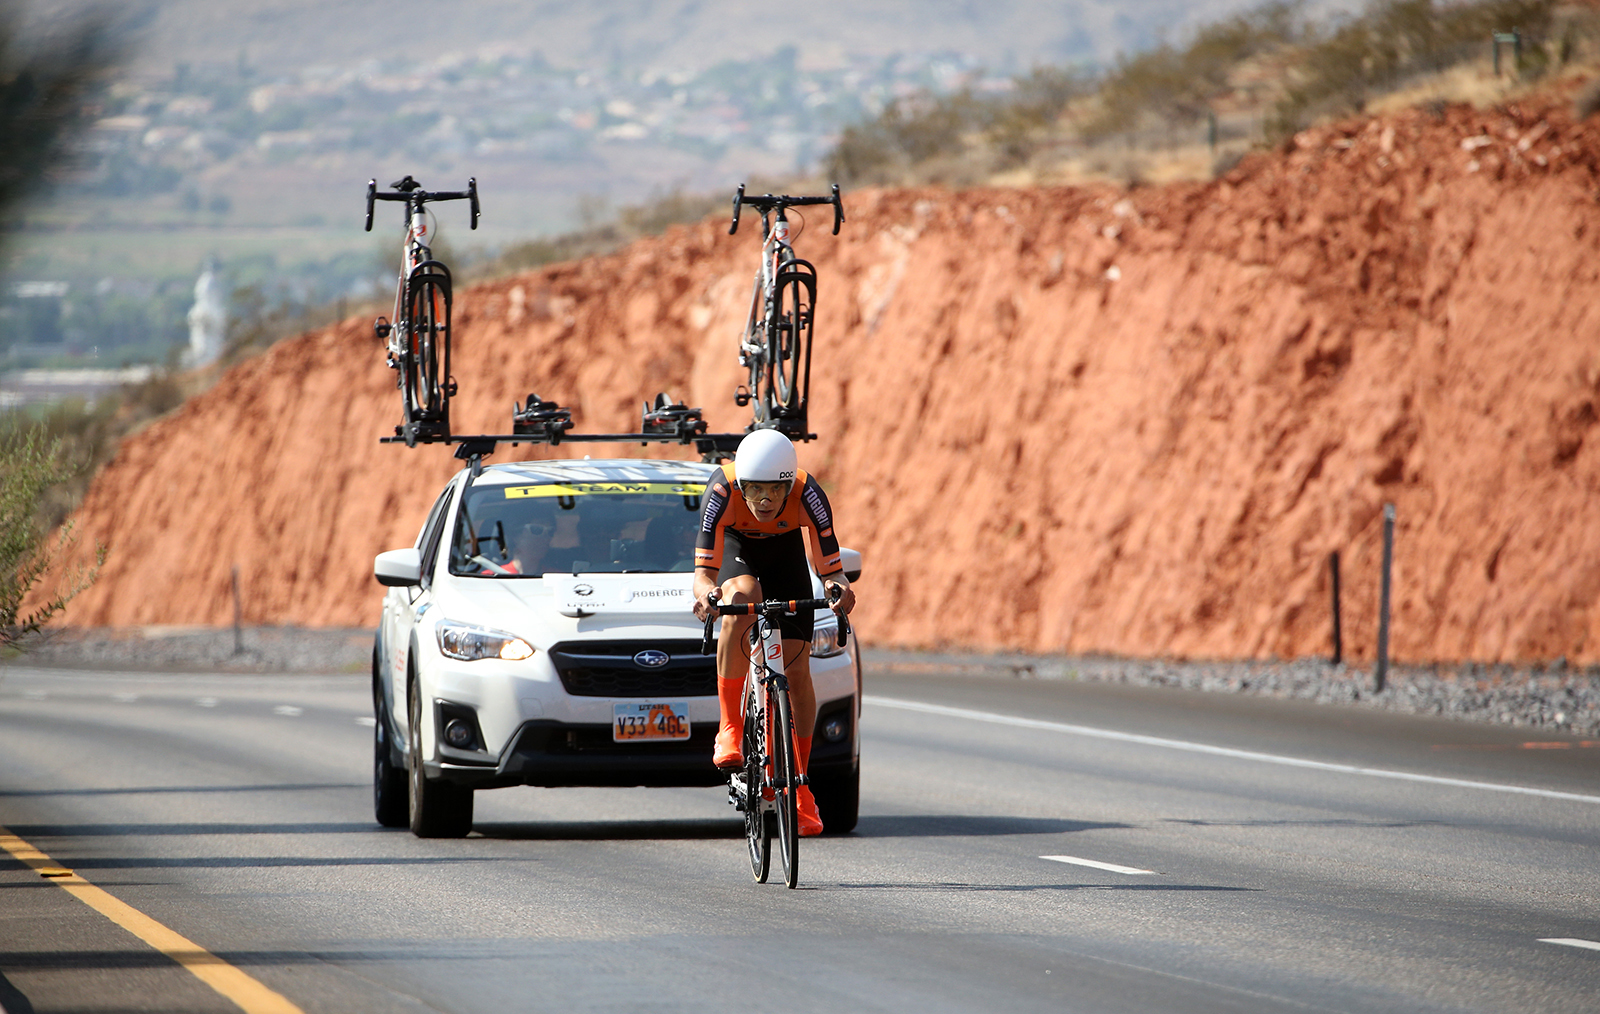 The first climb. 2018 Tour of Utah Team Prologue, August 6, 2018, St. George, Utah. Photo by Cathy Fegan-Kim, cottonsoxphotography.net